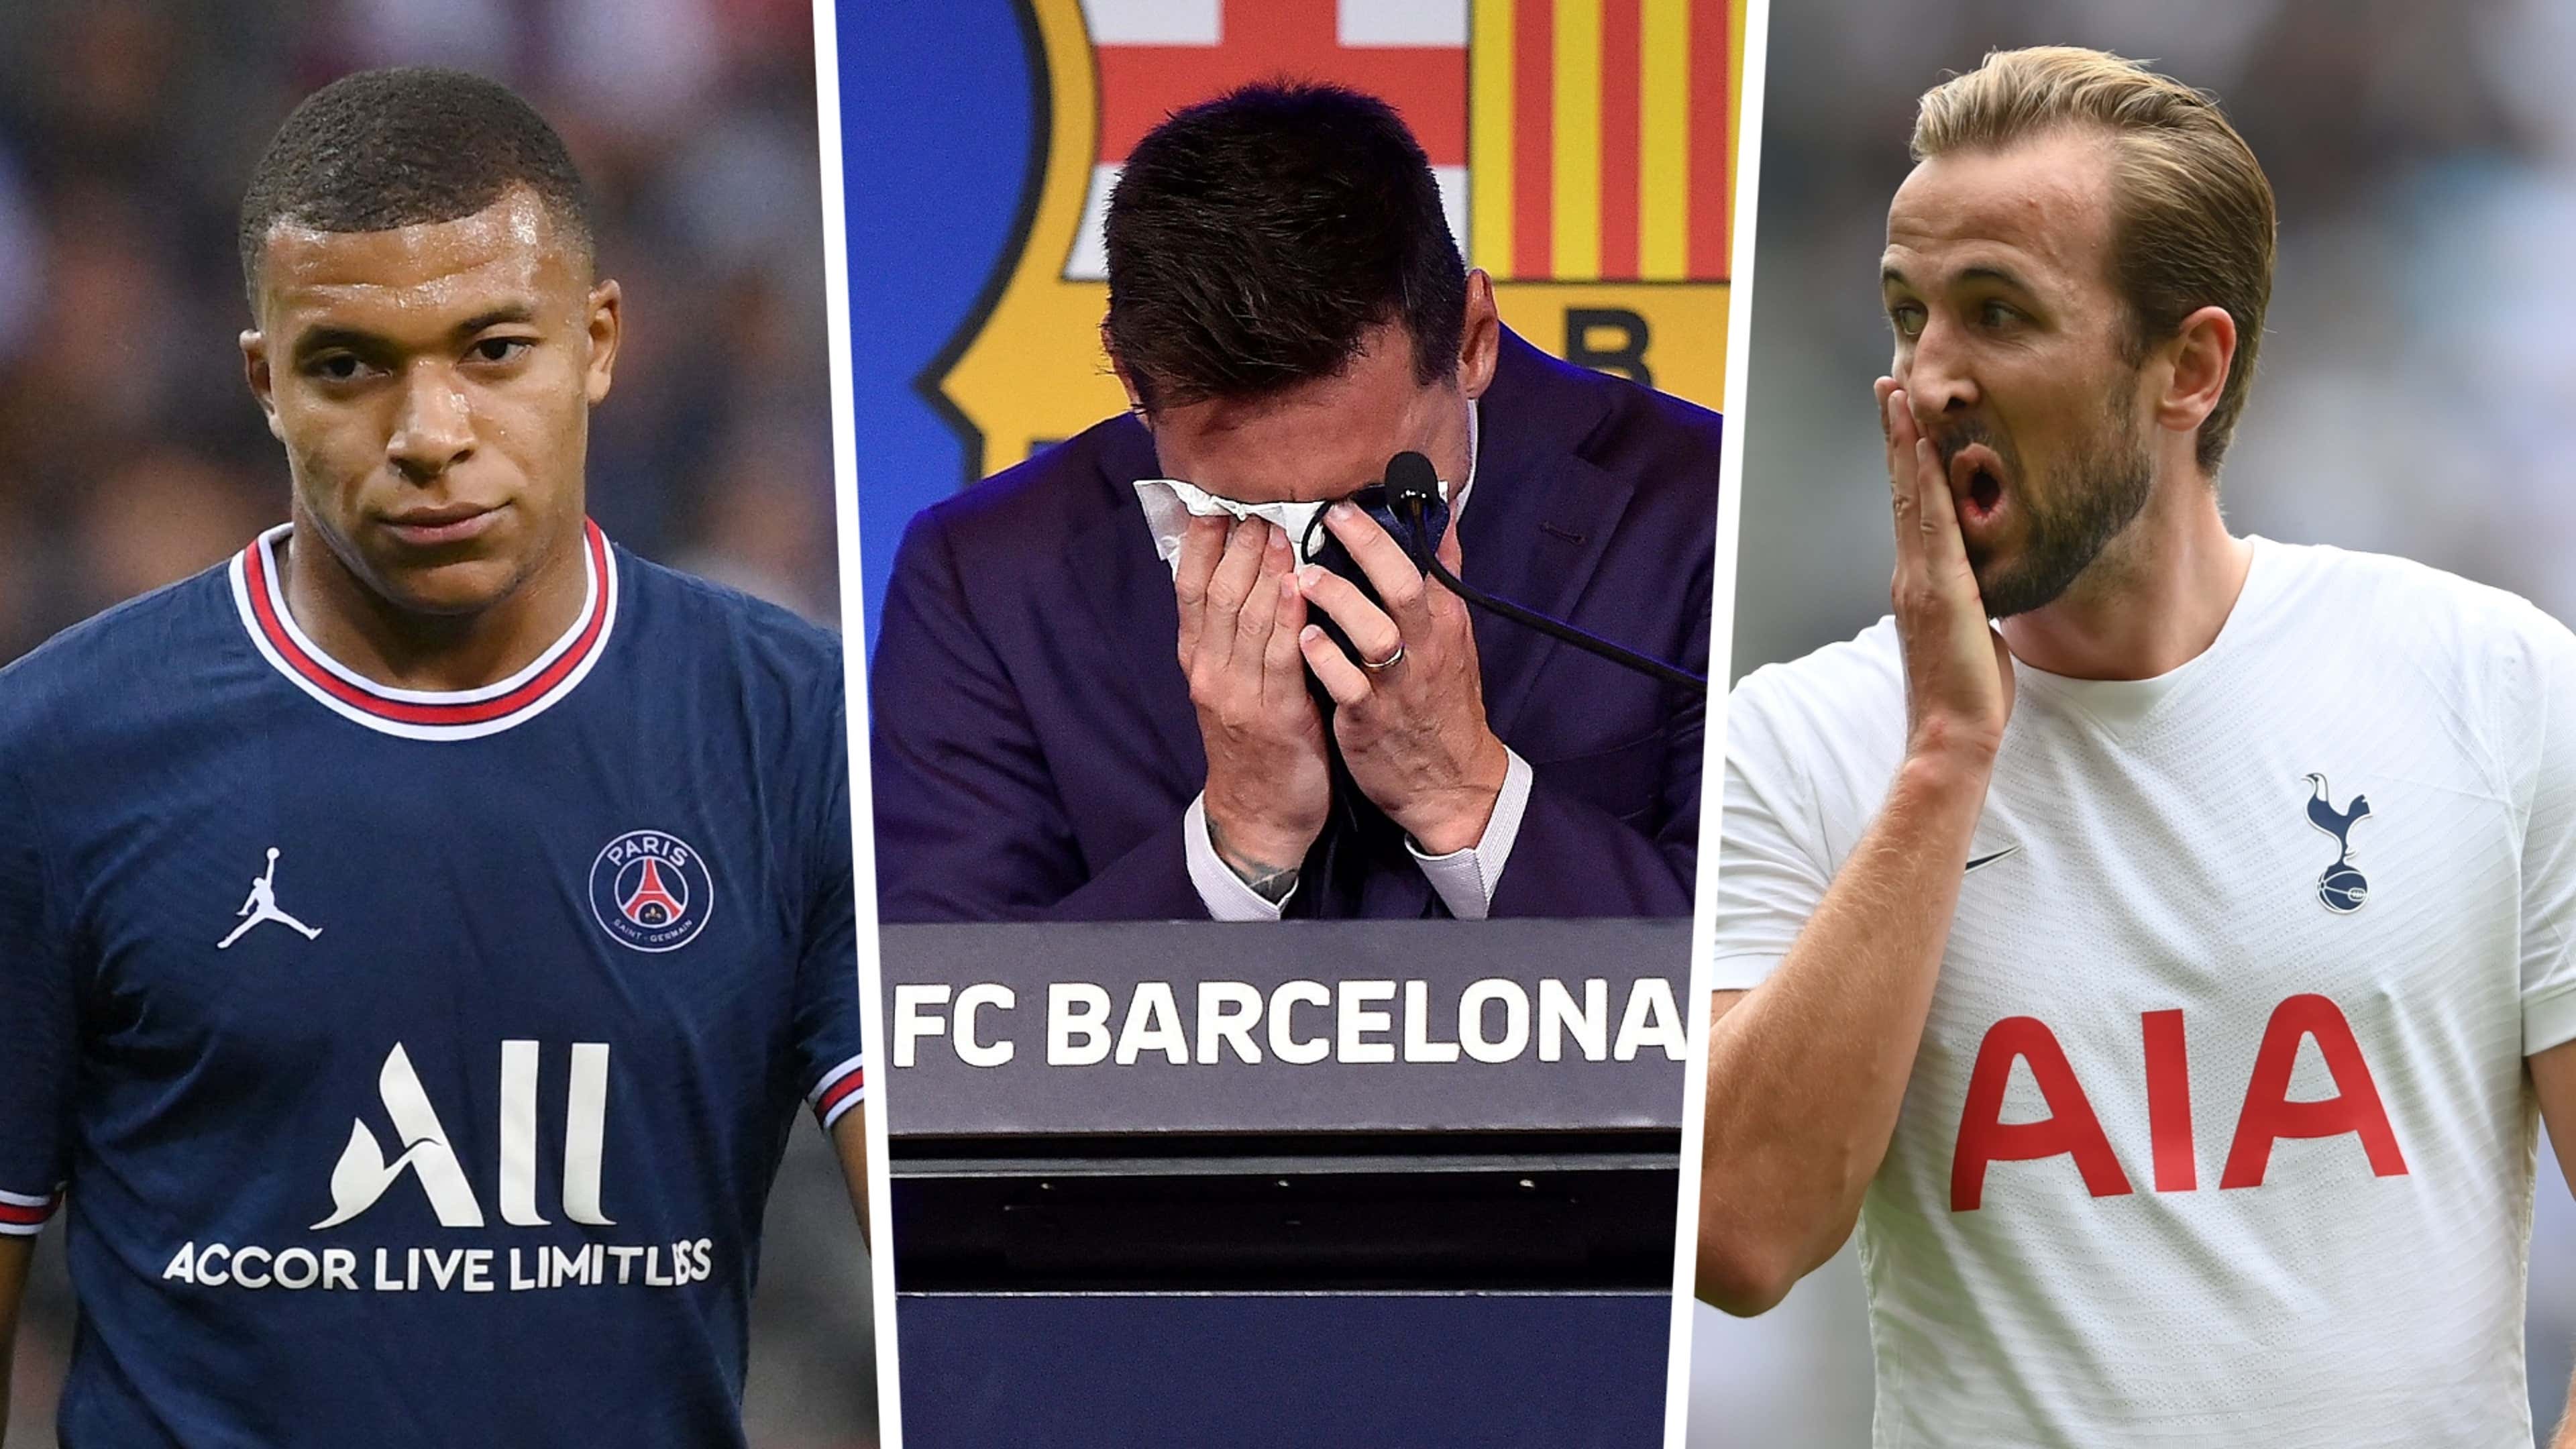 PSG also set to lose Kylian Mbappe after Lionel Messi transfer to MLS